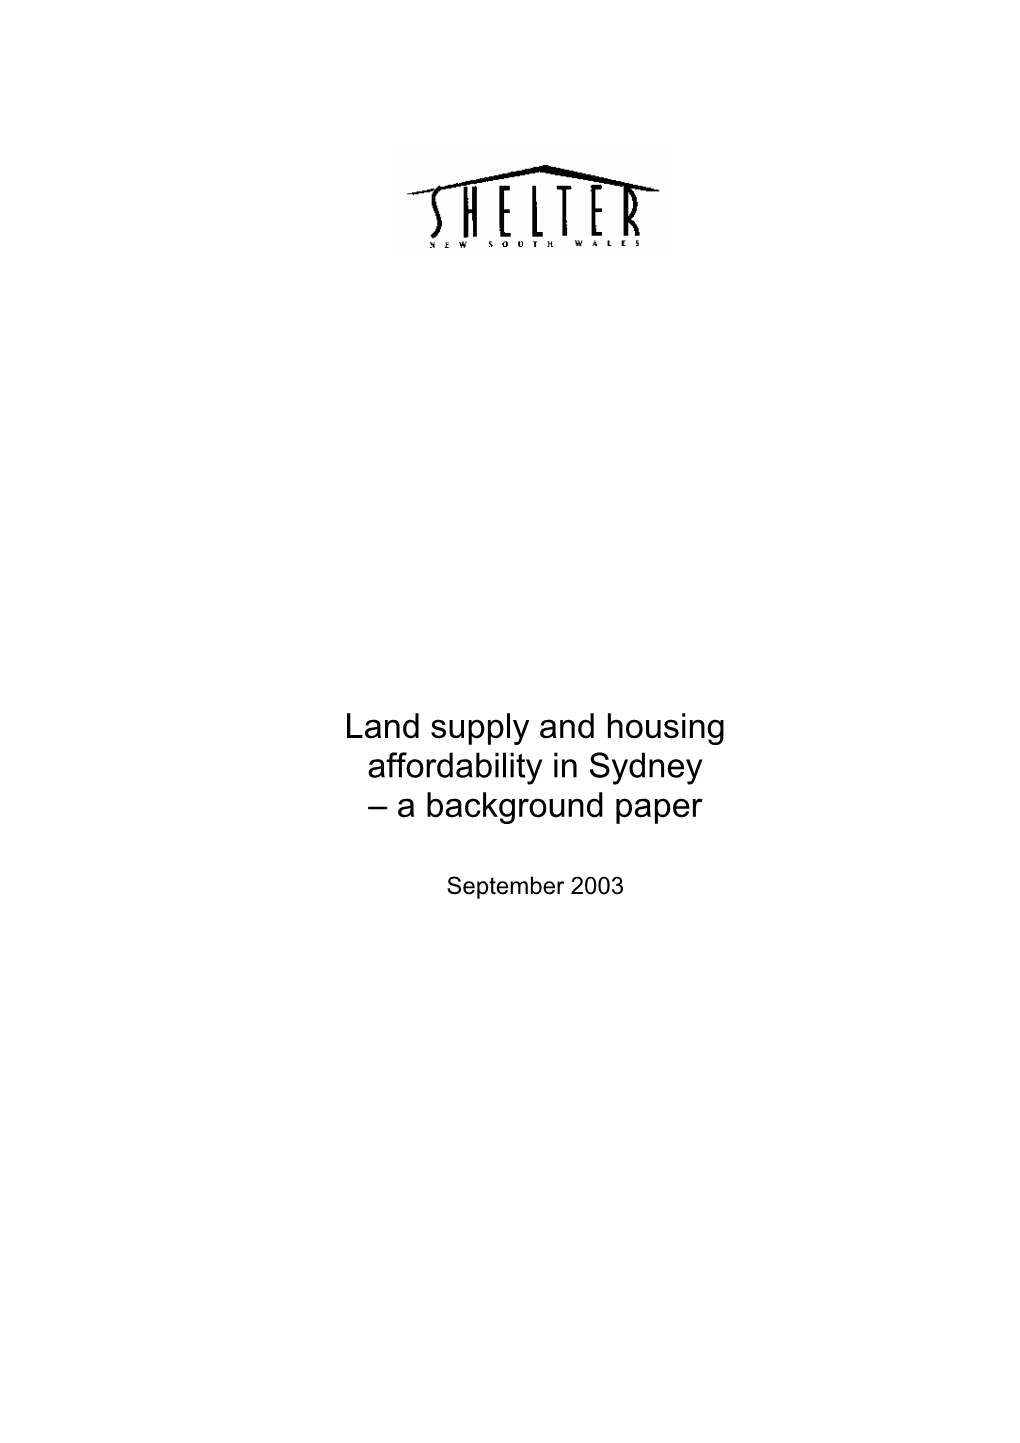 Land Supply and Housing Affordability in Sydney – a Background Paper